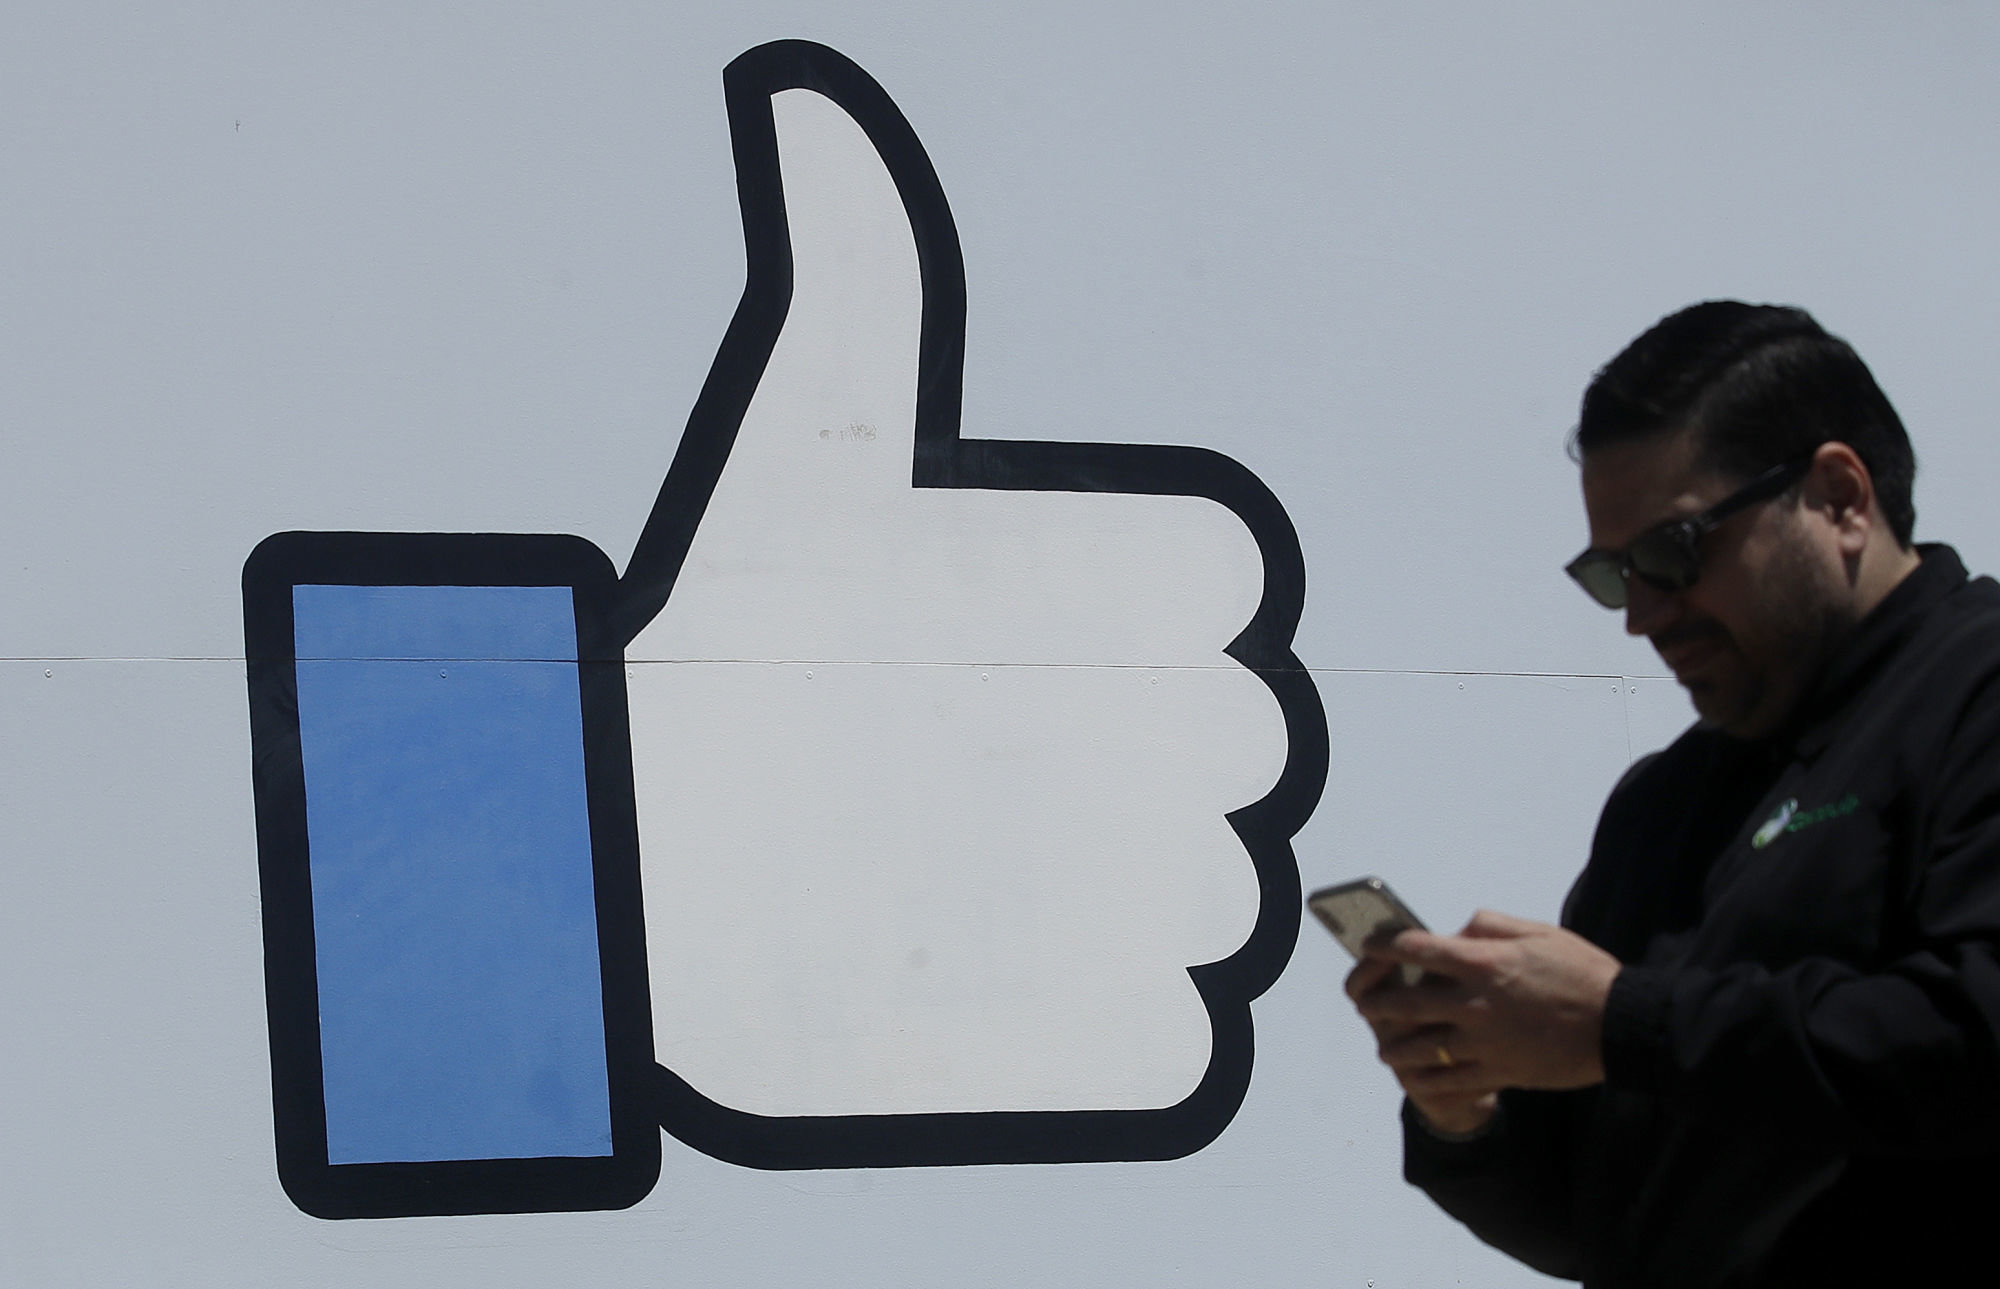 Facebook sues analytics firm that stole user data through third-party apps